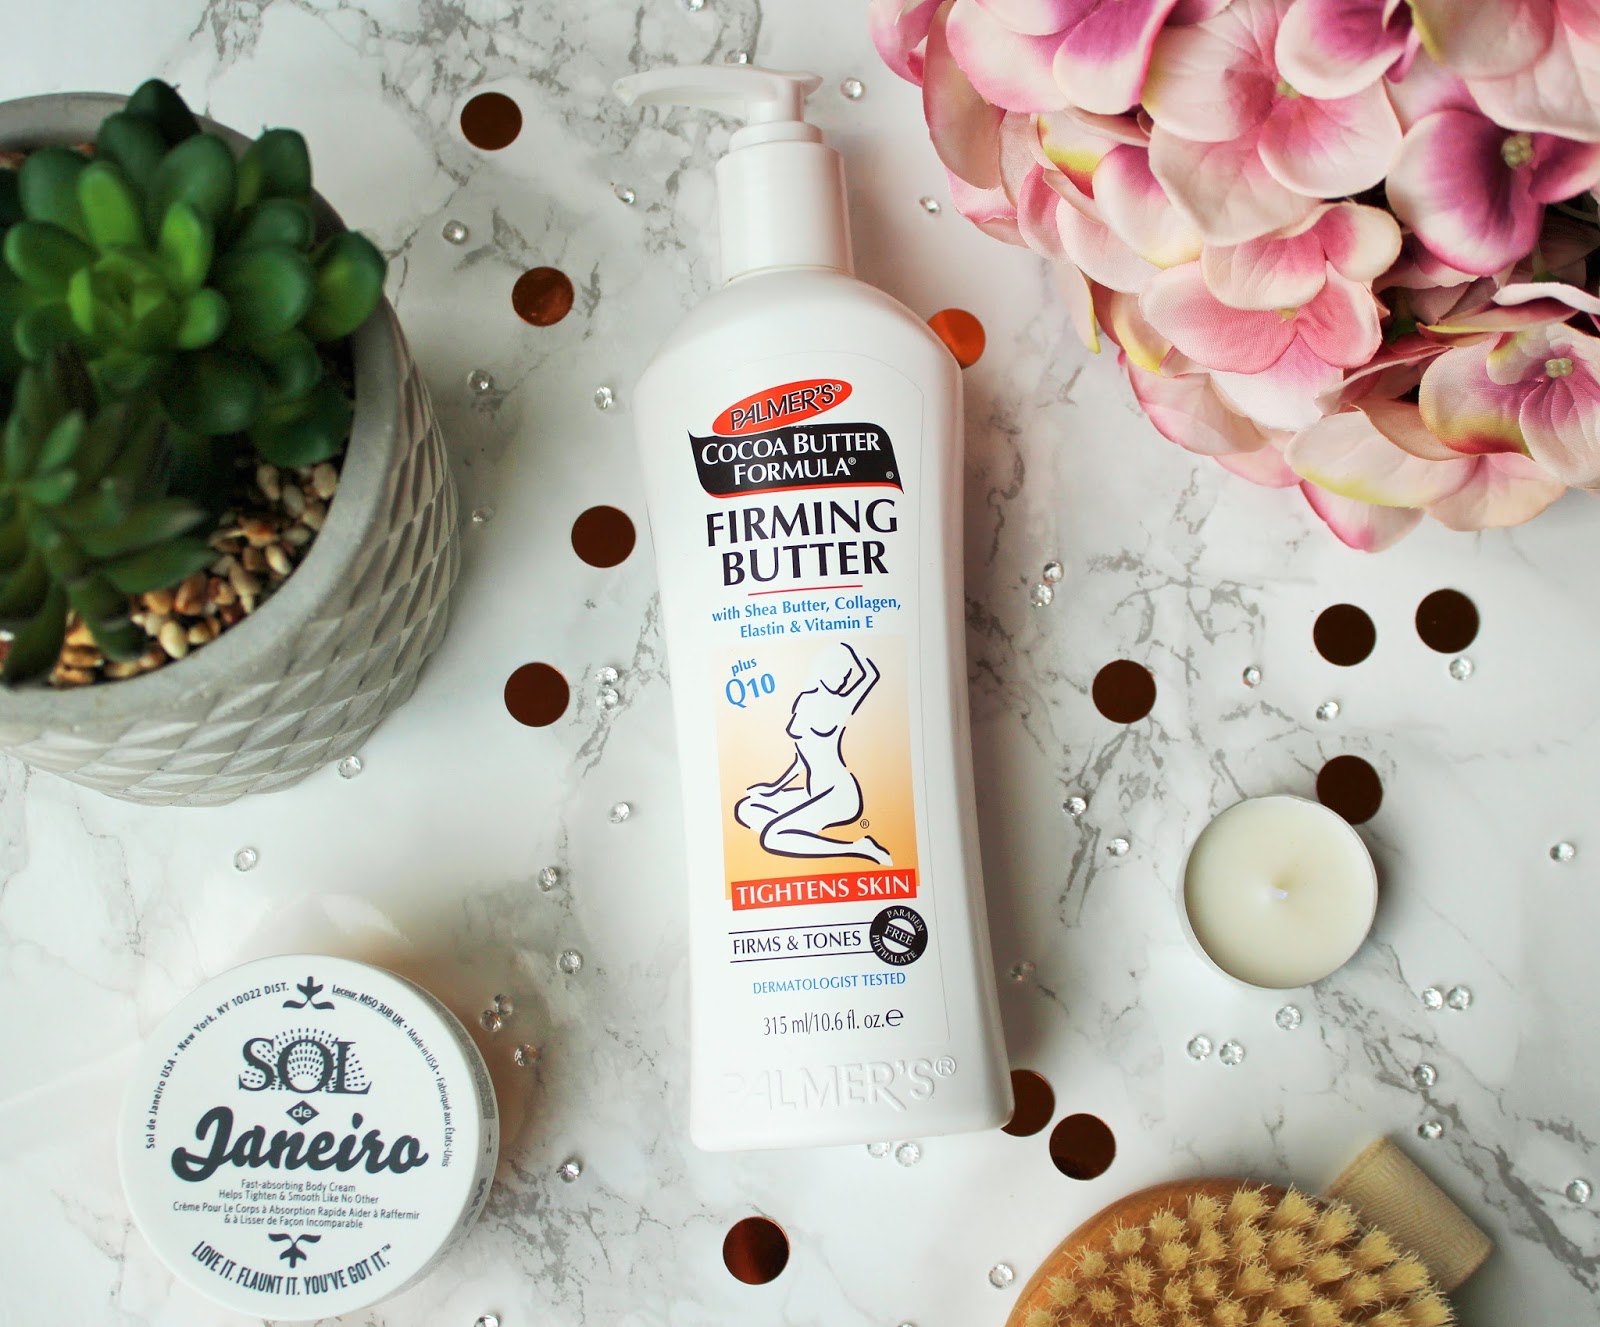 My Favourite Body Firming Products - 3 - Palmer's Cocoa Butter Formula Firming Butter